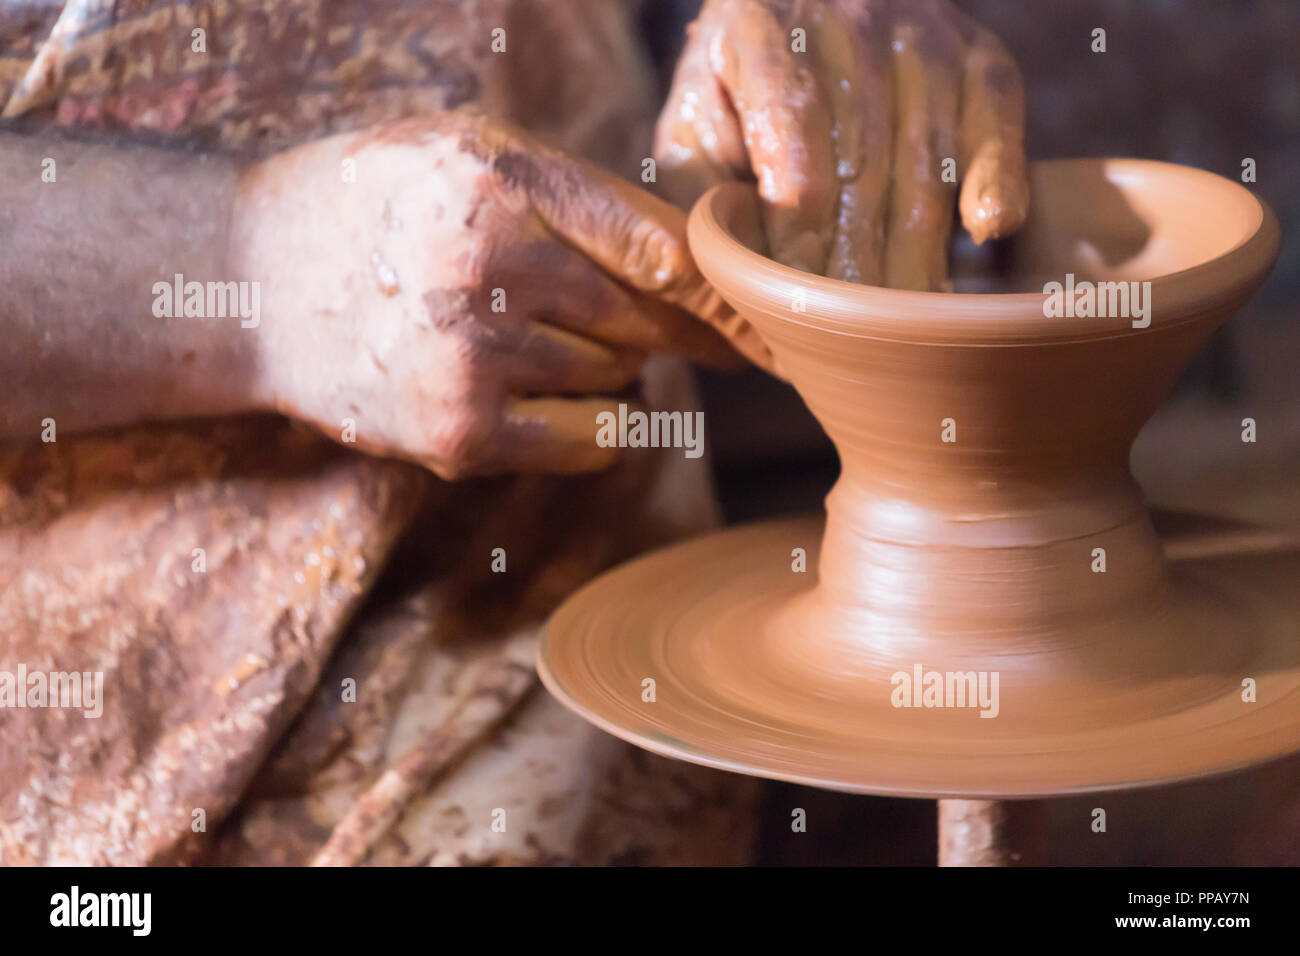 Artisan Making Pottery, Sculptor from Wet Clay on Wheel. Making Ceramic  Dishes. Close-up. Stock Image - Image of potty, pottery: 201259479